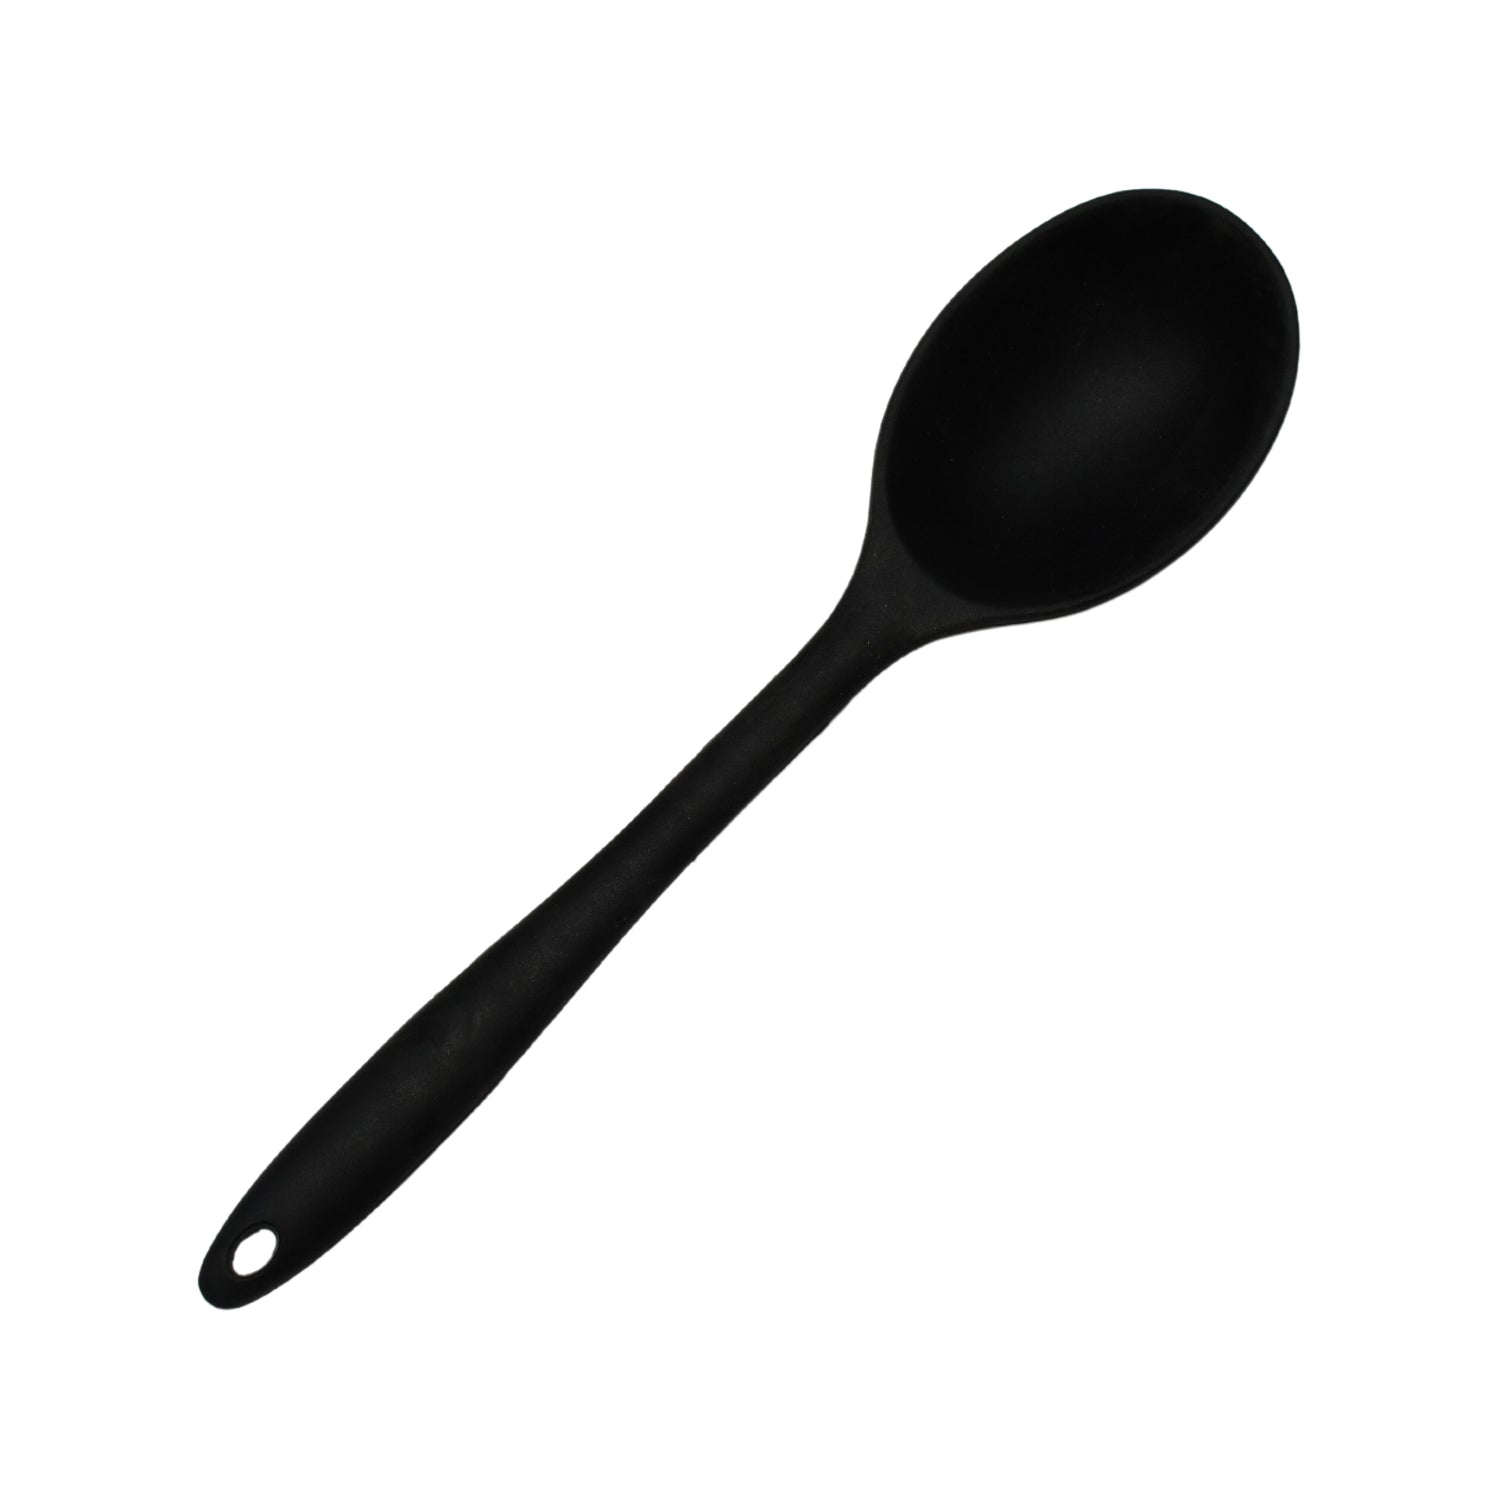 5409 Silicone Spoons for Cooking - Large Heat Resistant Kitchen Spoons. JK Trends